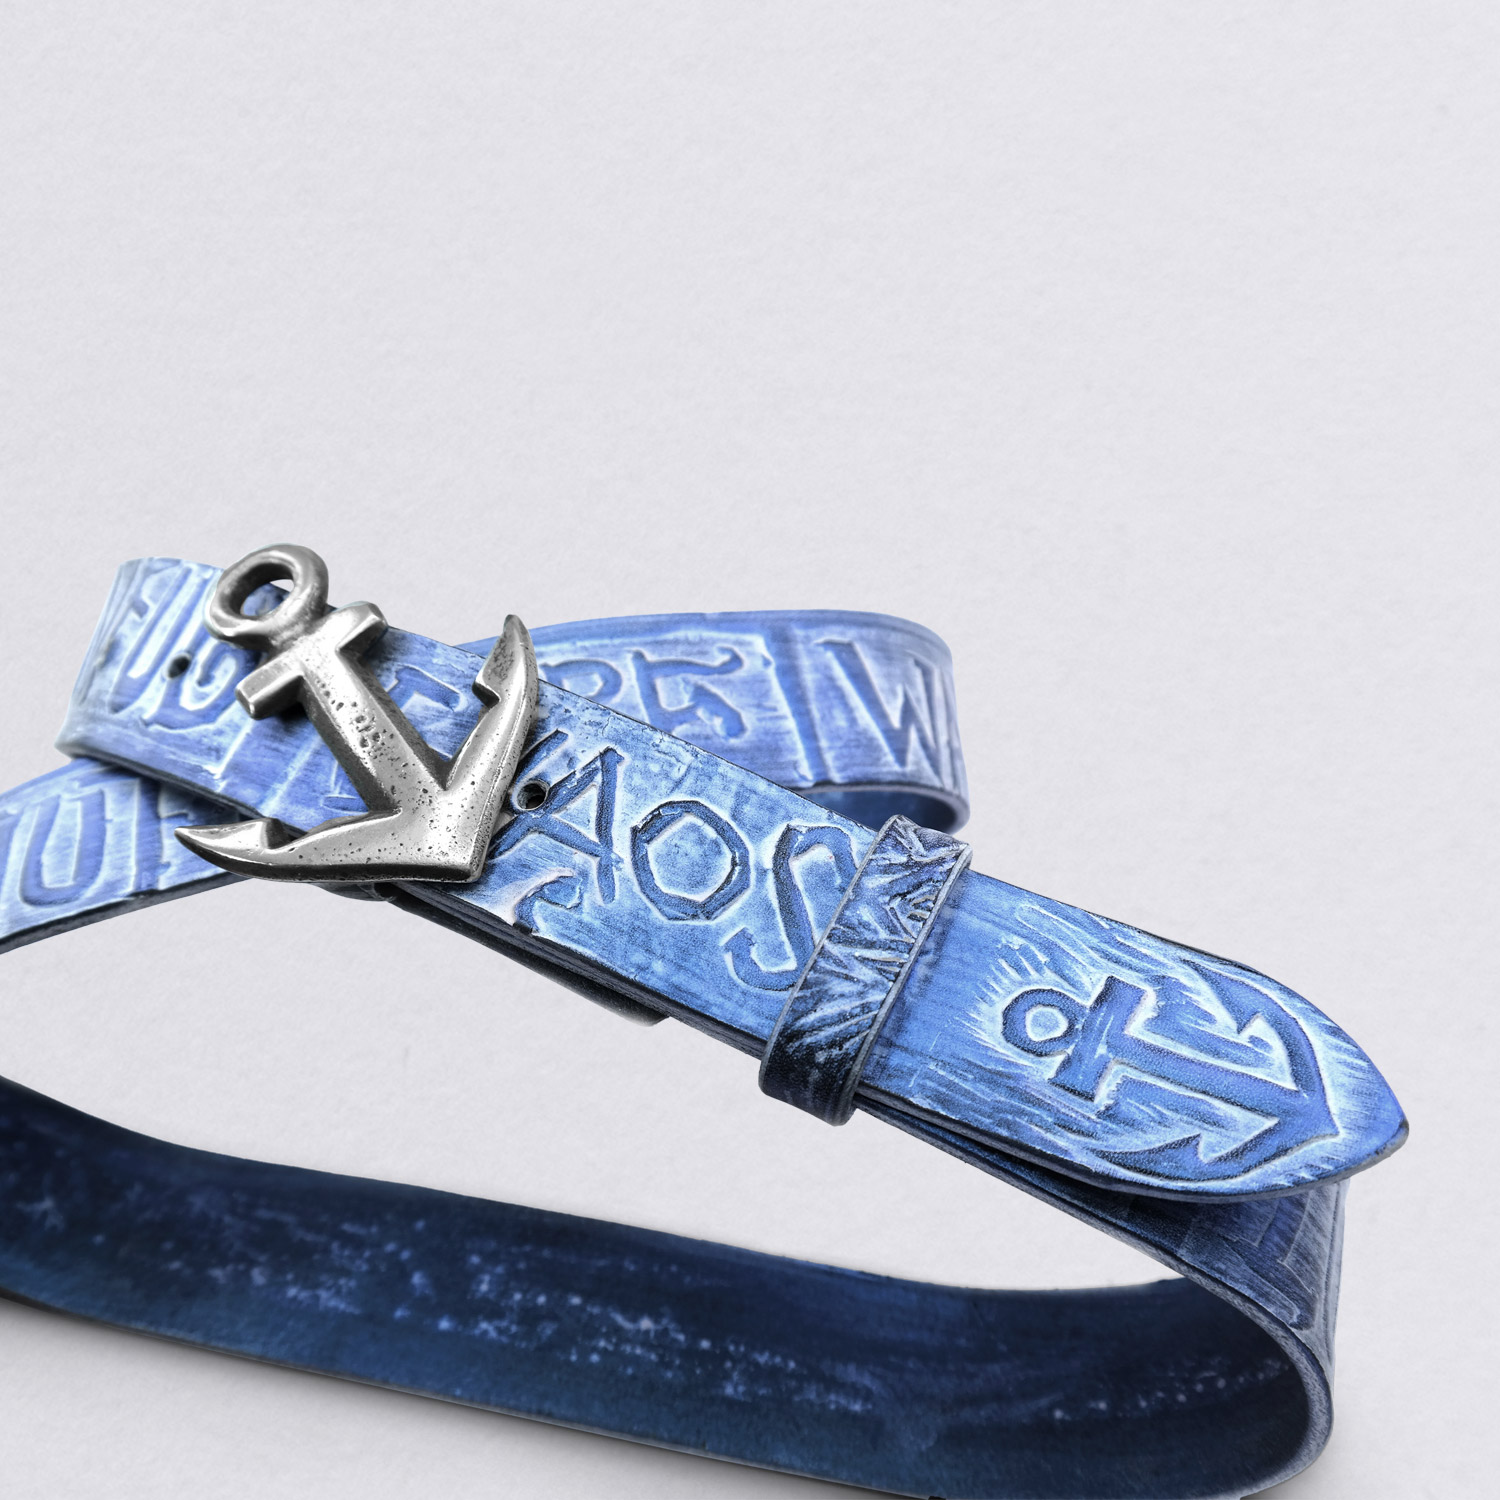 Belt Chaos Blue with anchor clasp - by Neptunsschmeiße